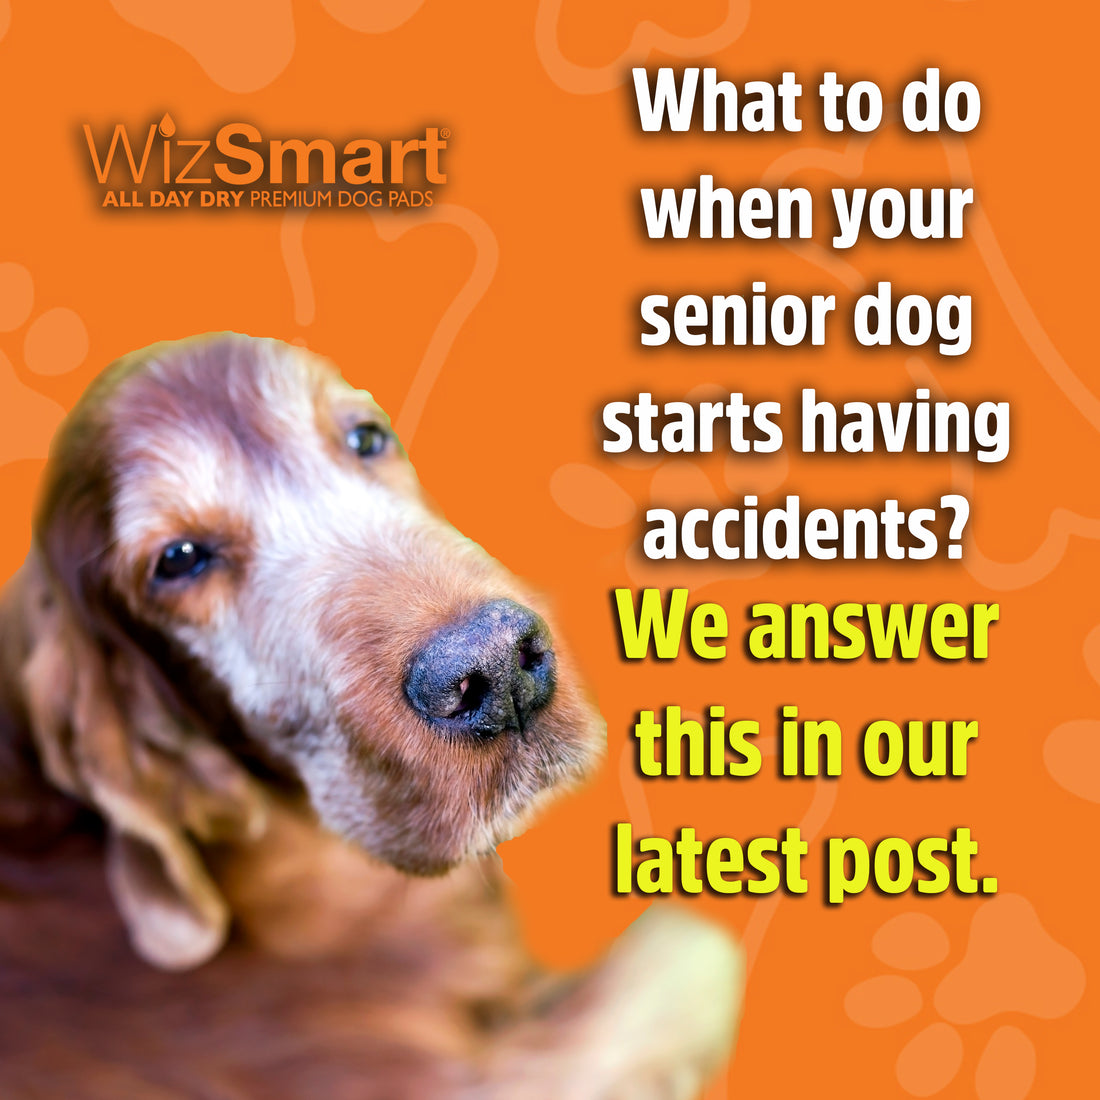 What to do when your senior dog starts having accidents?